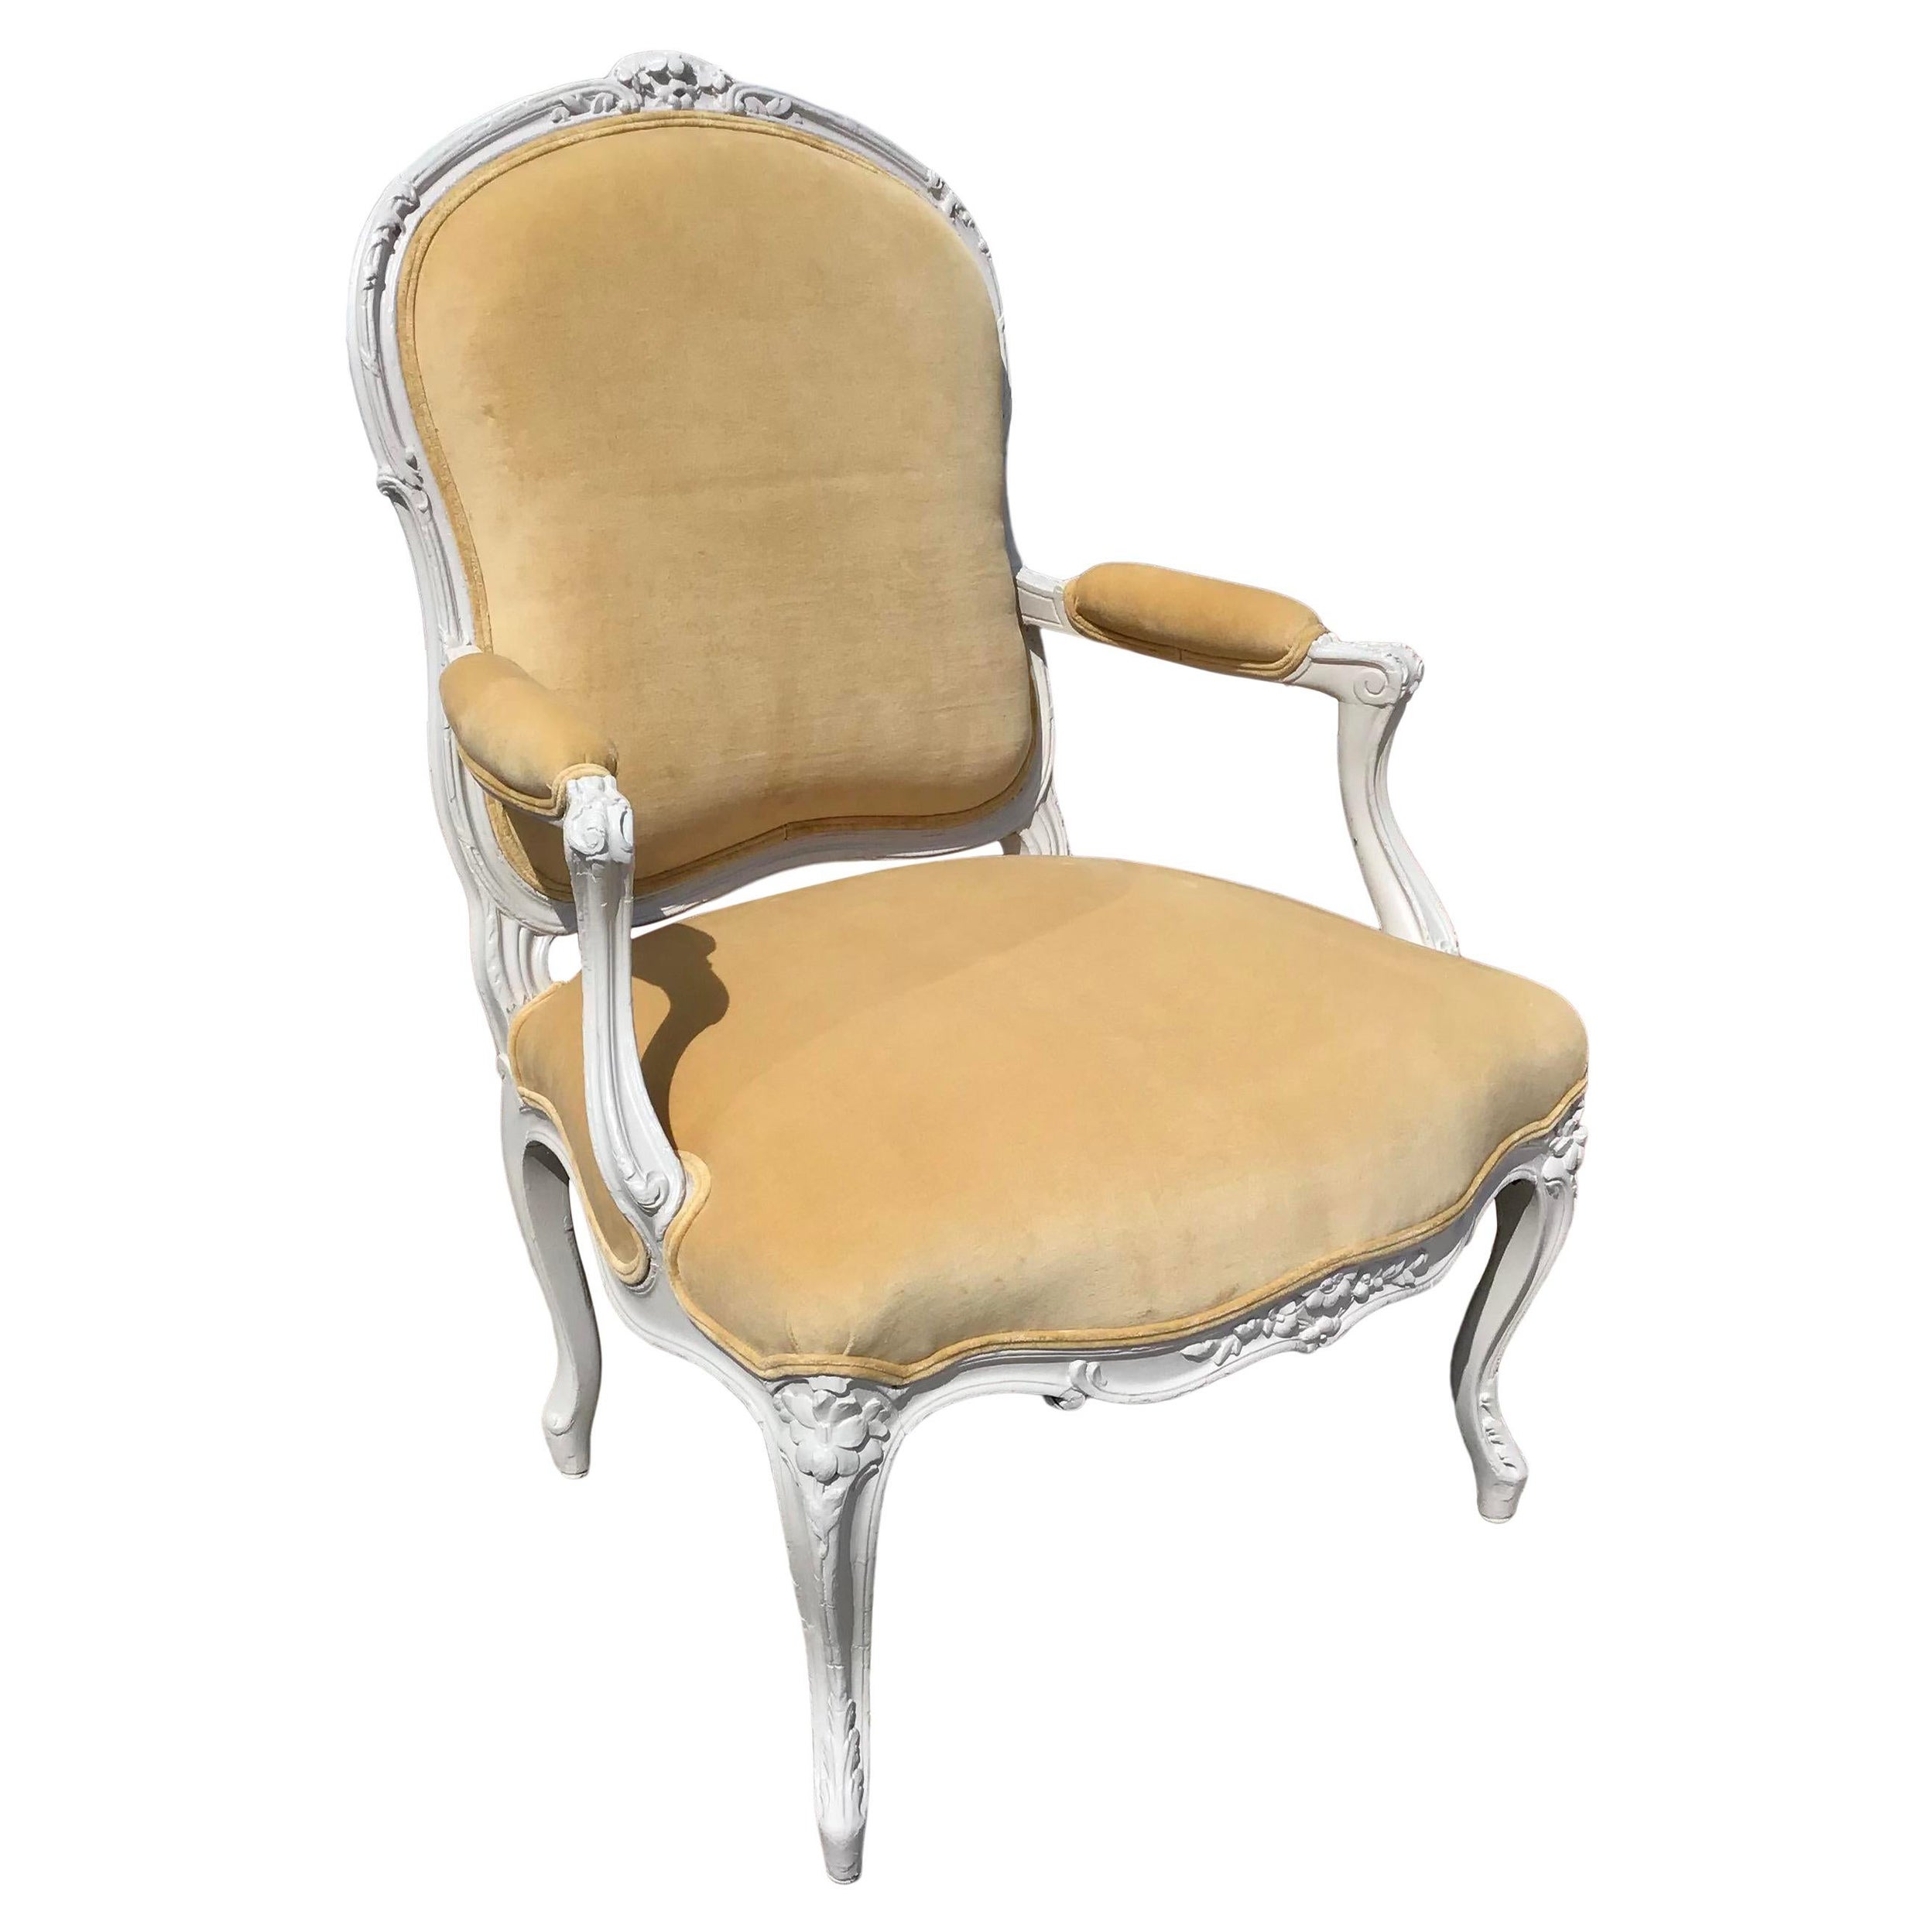 Classic French Louis XV Fauteuil Chair in New Gold Velvet Upholstery For Sale